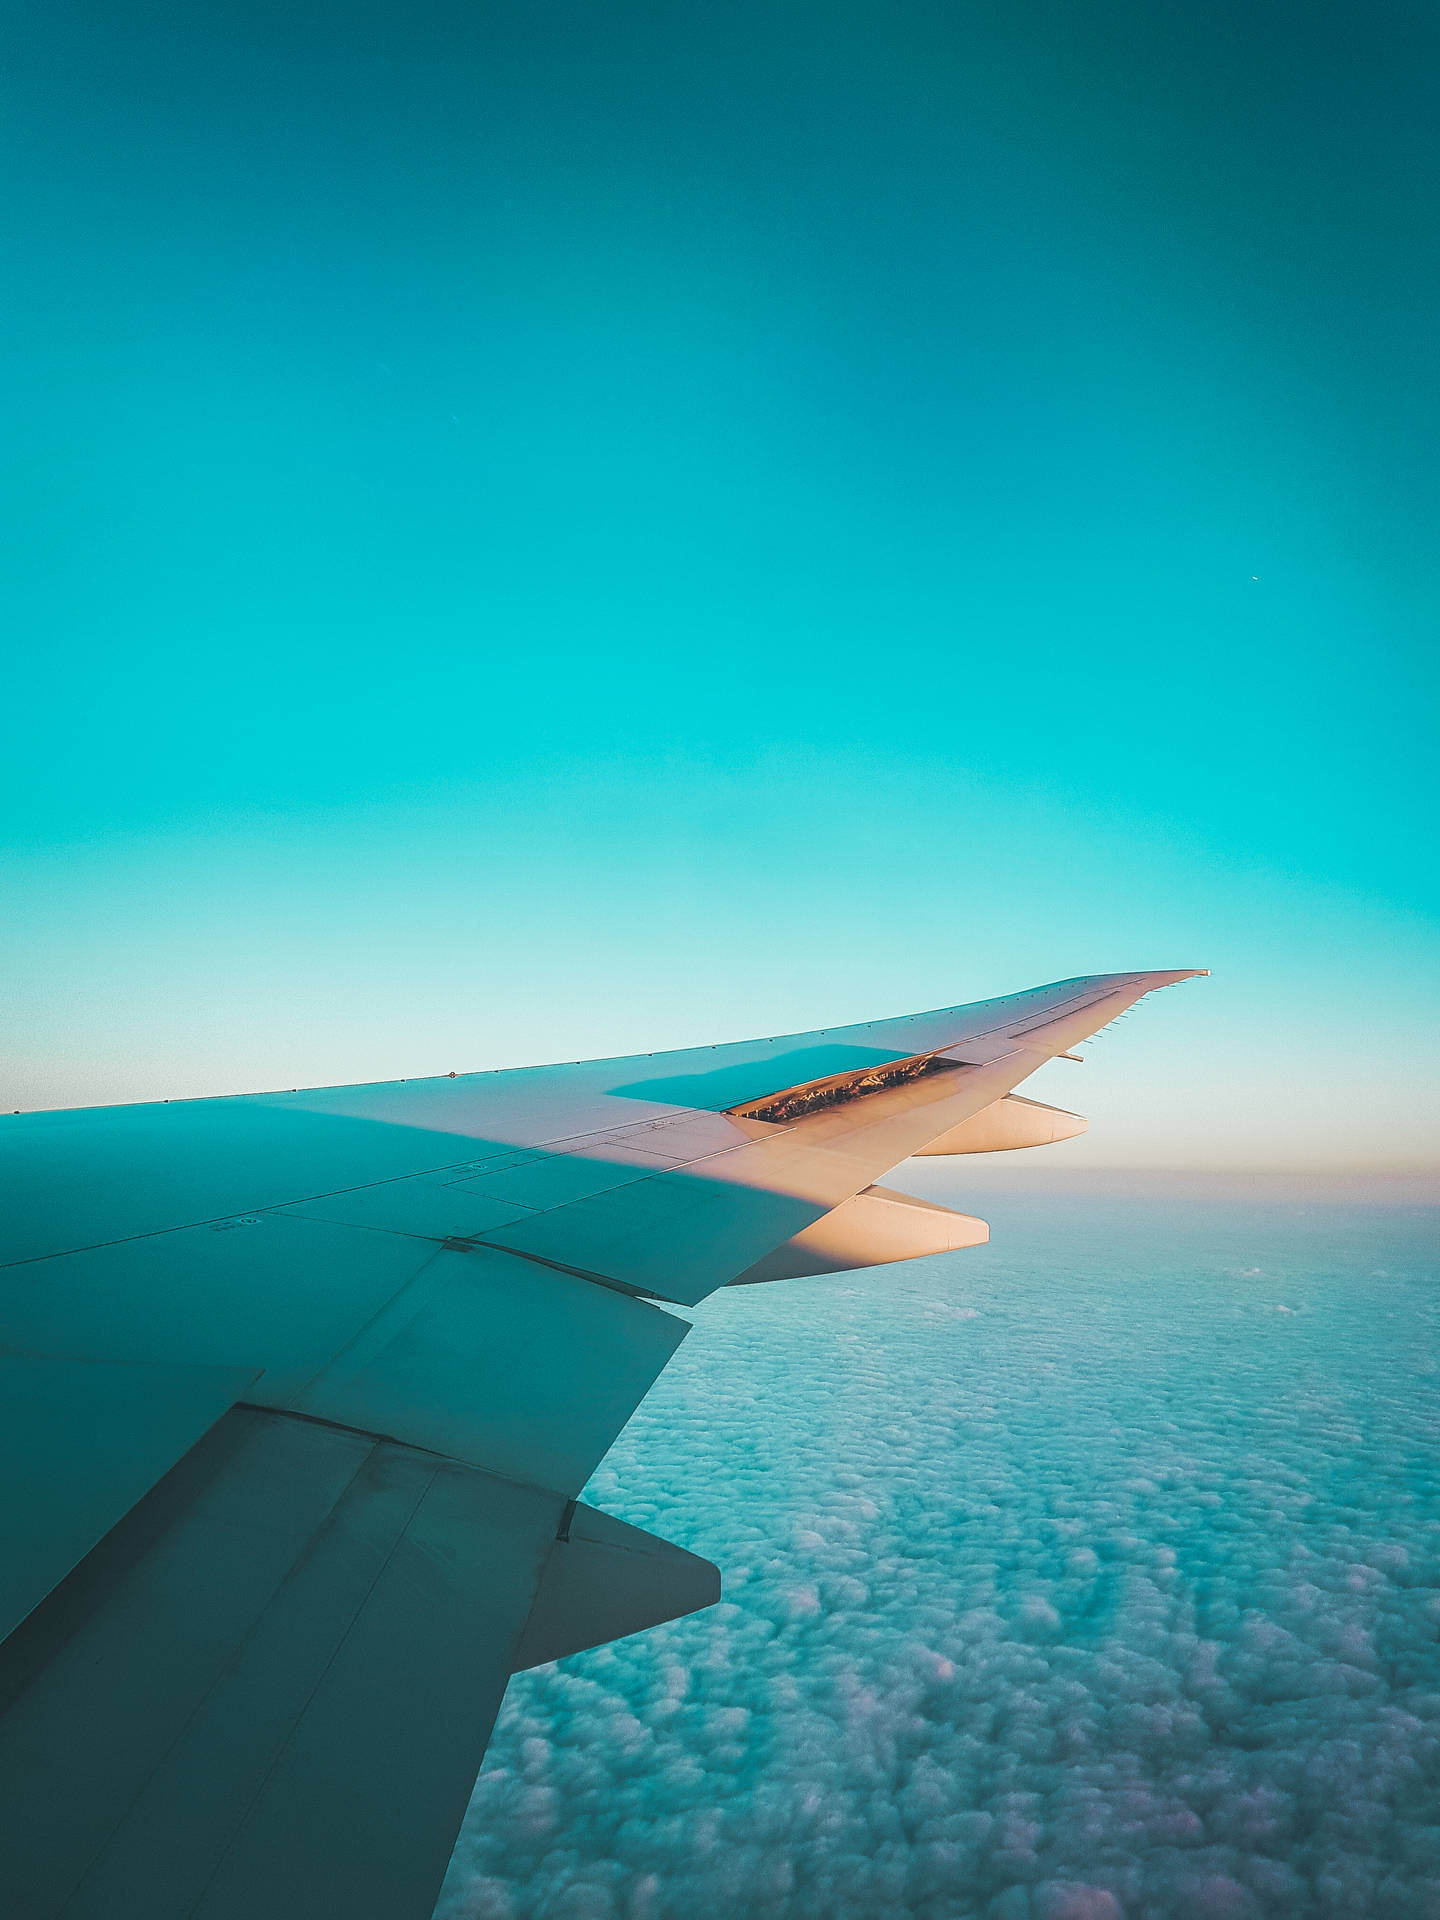 Teal Sky And Airplane Wing Background